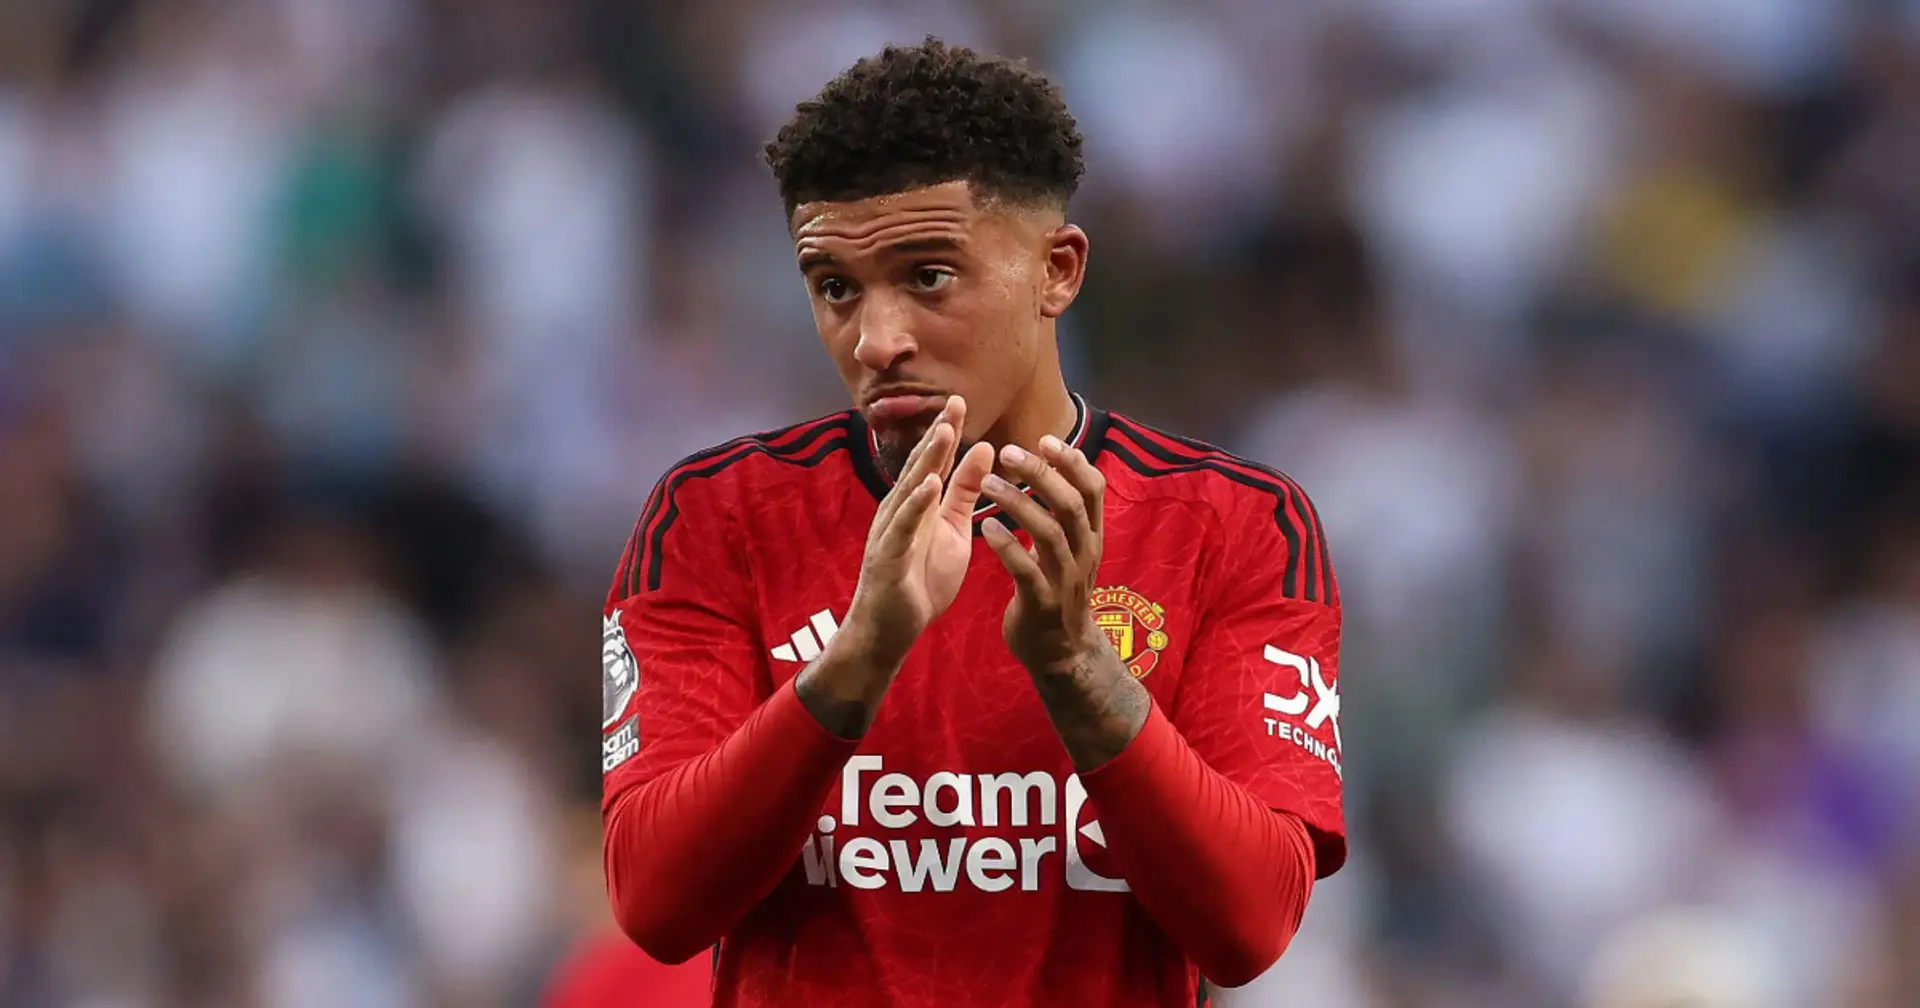 Sky Germany: Jadon Sancho likely to leave Premier League in January (reliability: 4 stars)